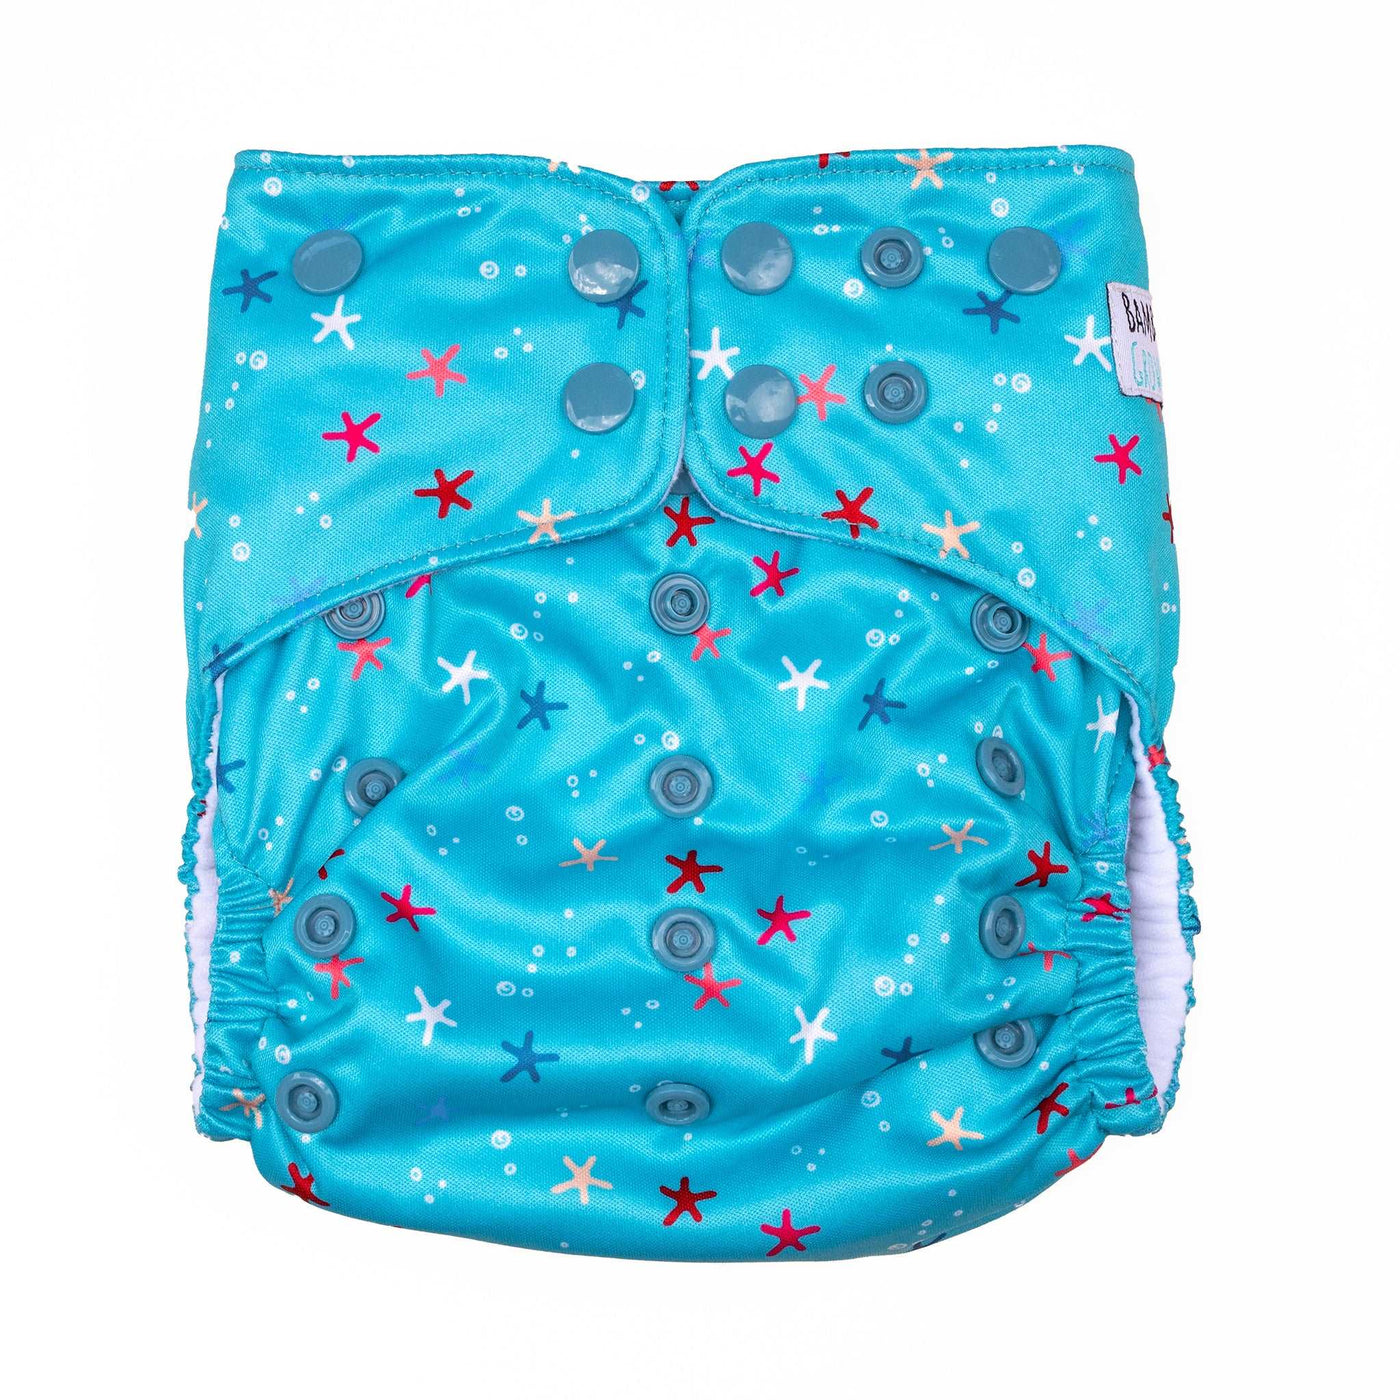 Nappy Bundle "Under The Sea" - 6 Nappies and Wet Bag Set